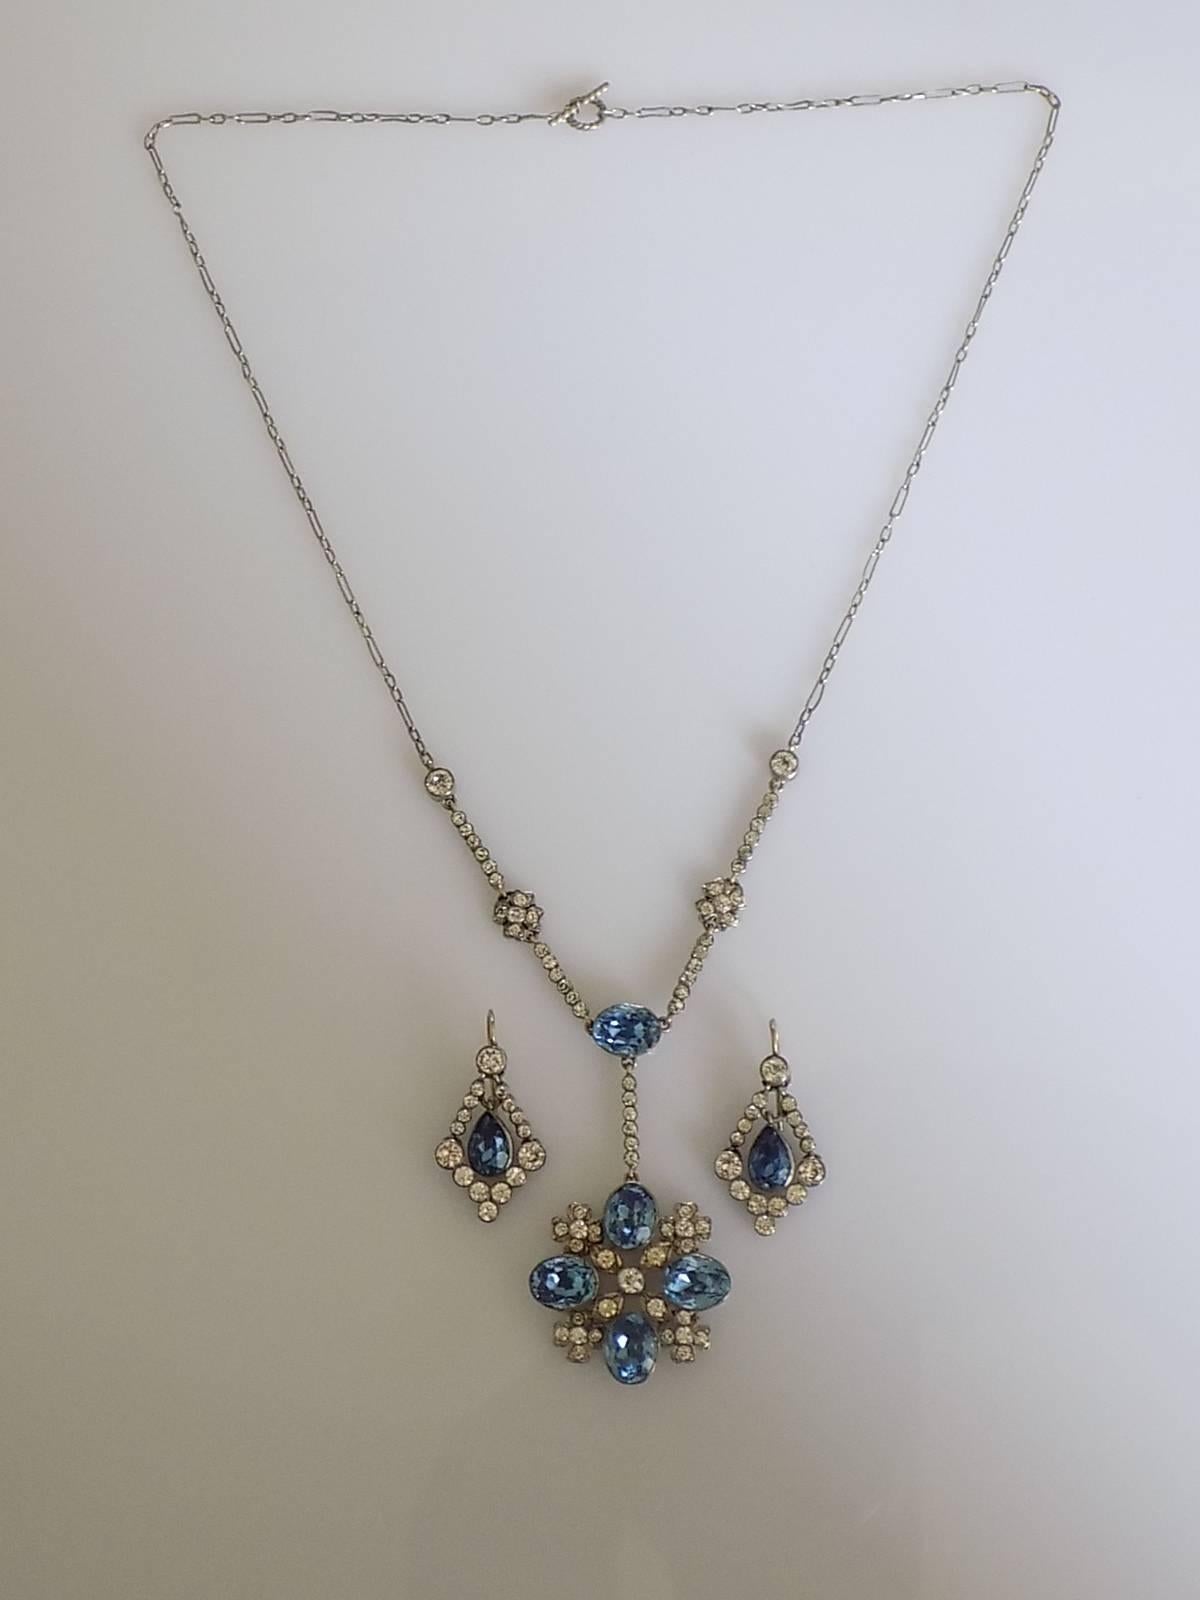 Outstanding and Rare Antique Edwardian c.1900-1910 Cornflower Sapphire paste and Diamond paste earrings necklace set. Paste (immitation of gemstones) in closed back settings and made in Georgian style. English origin.
Length of the necklace